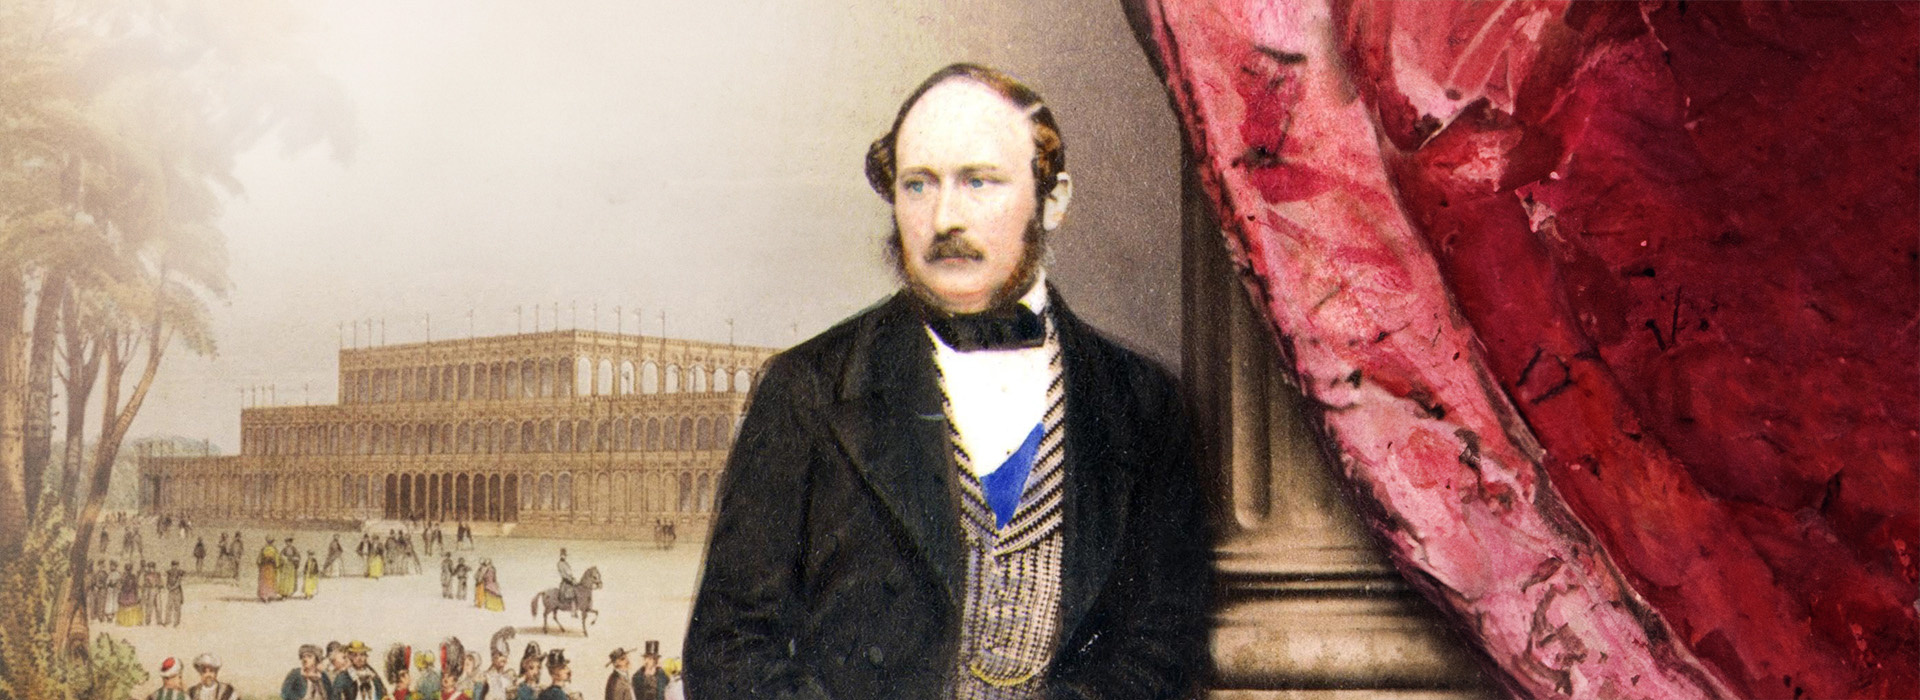 Movie poster Prince Albert: A Victorian Hero Revealed